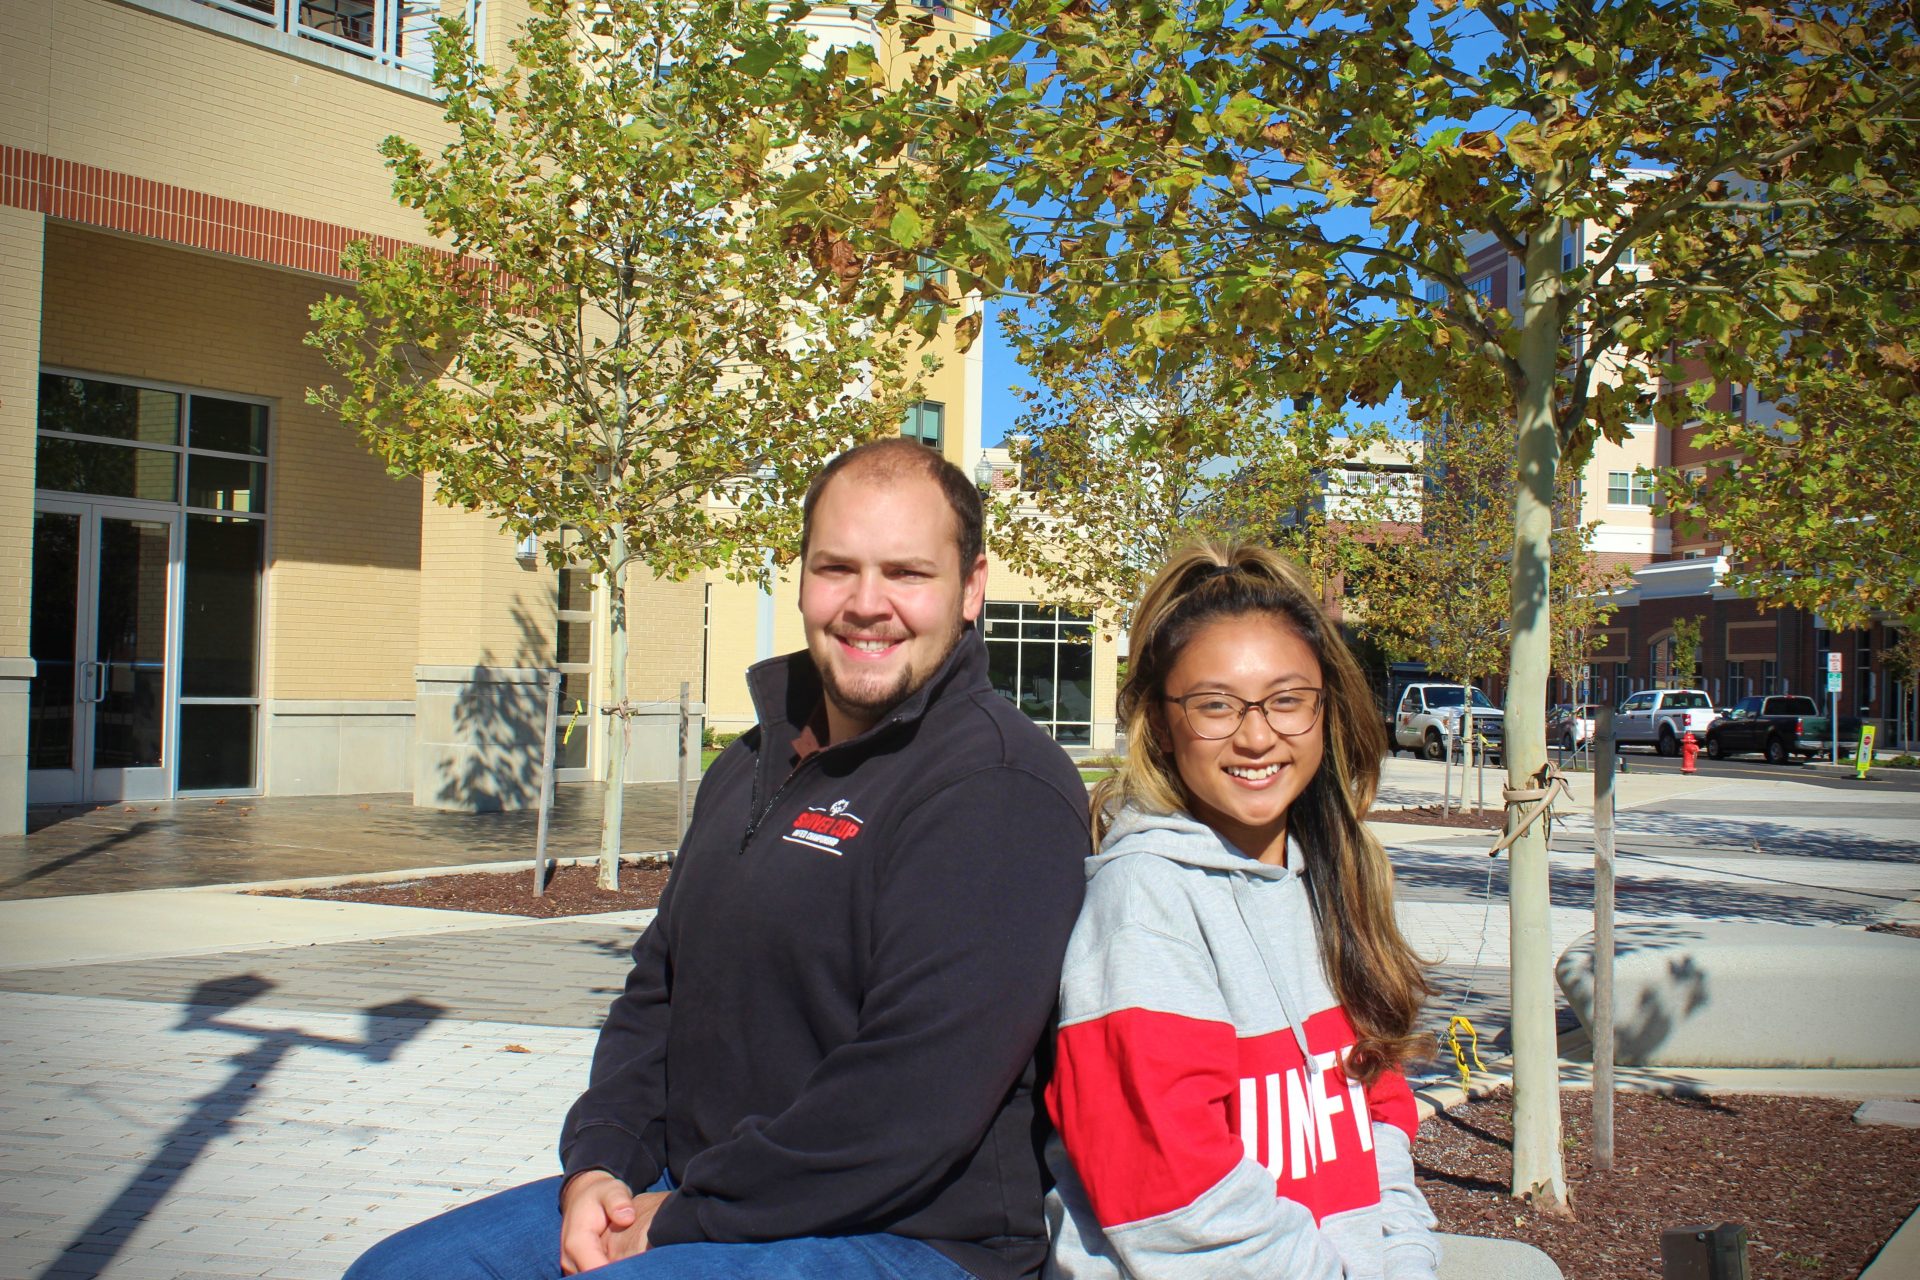 Joe (left) and Kaitlee (right) sitting on a bench at Rowan's campus.